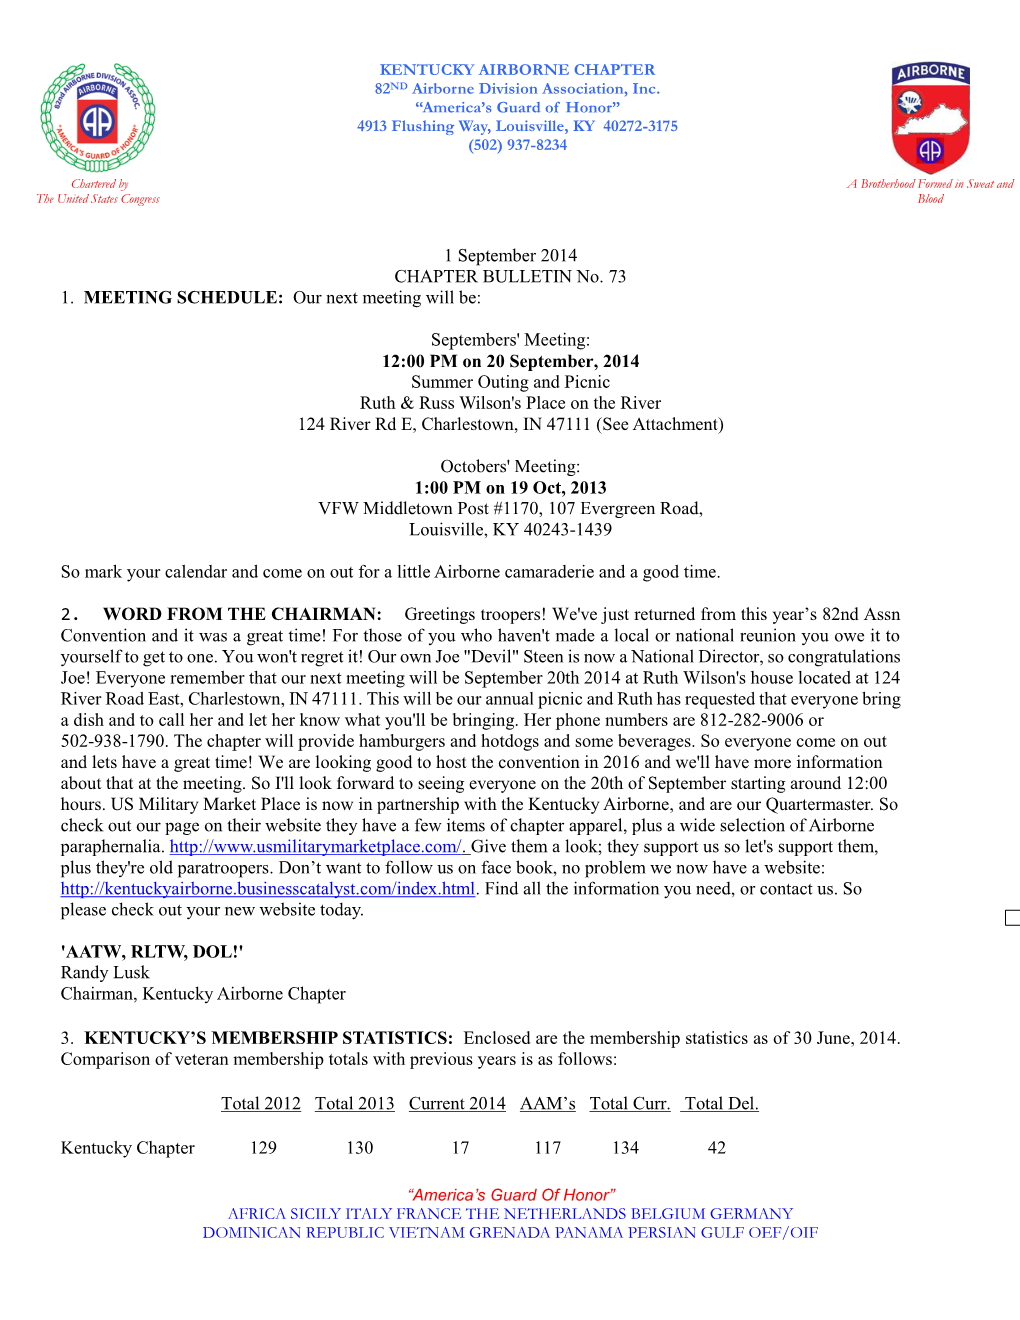 1 September 2014 CHAPTER BULLETIN No. 73 1. MEETING SCHEDULE: Our Next Meeting Will Be